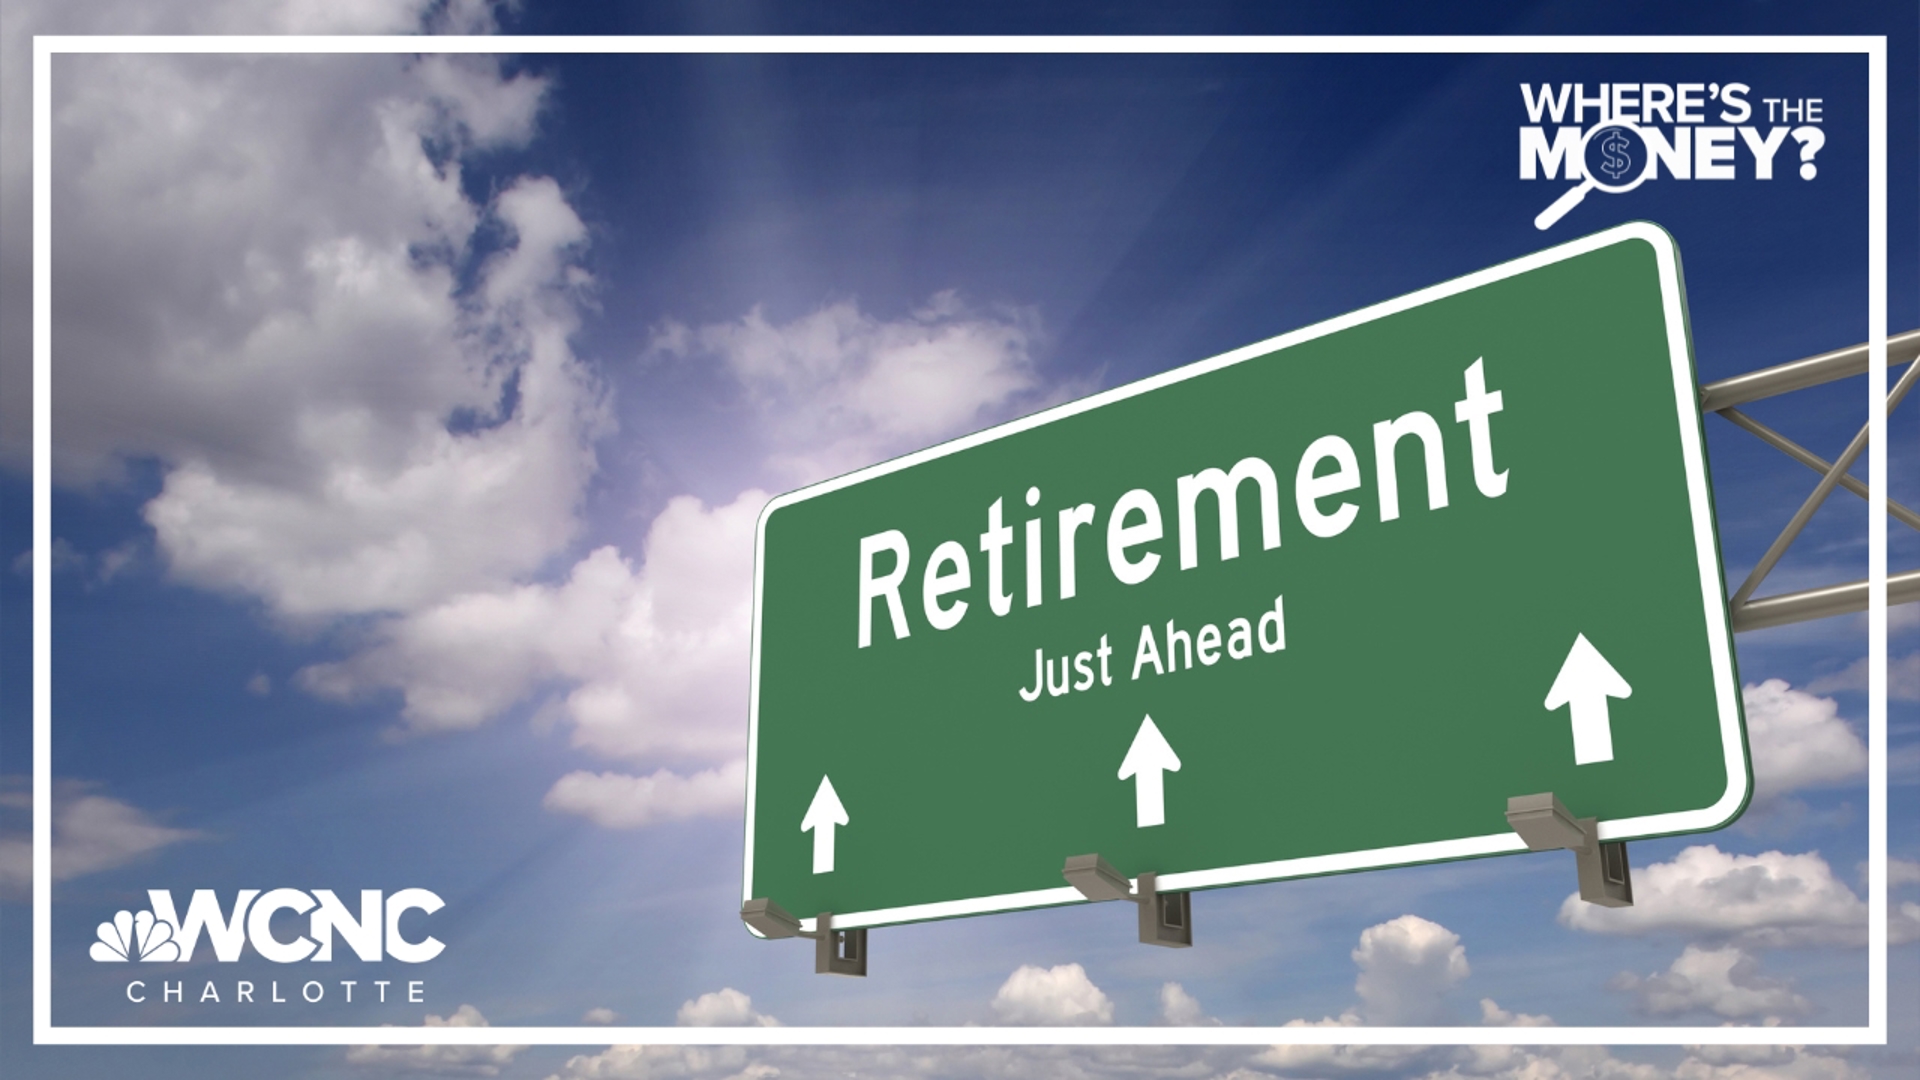 A recent AARP survey found one in five Americans ages 50 and older have no retirement savings.